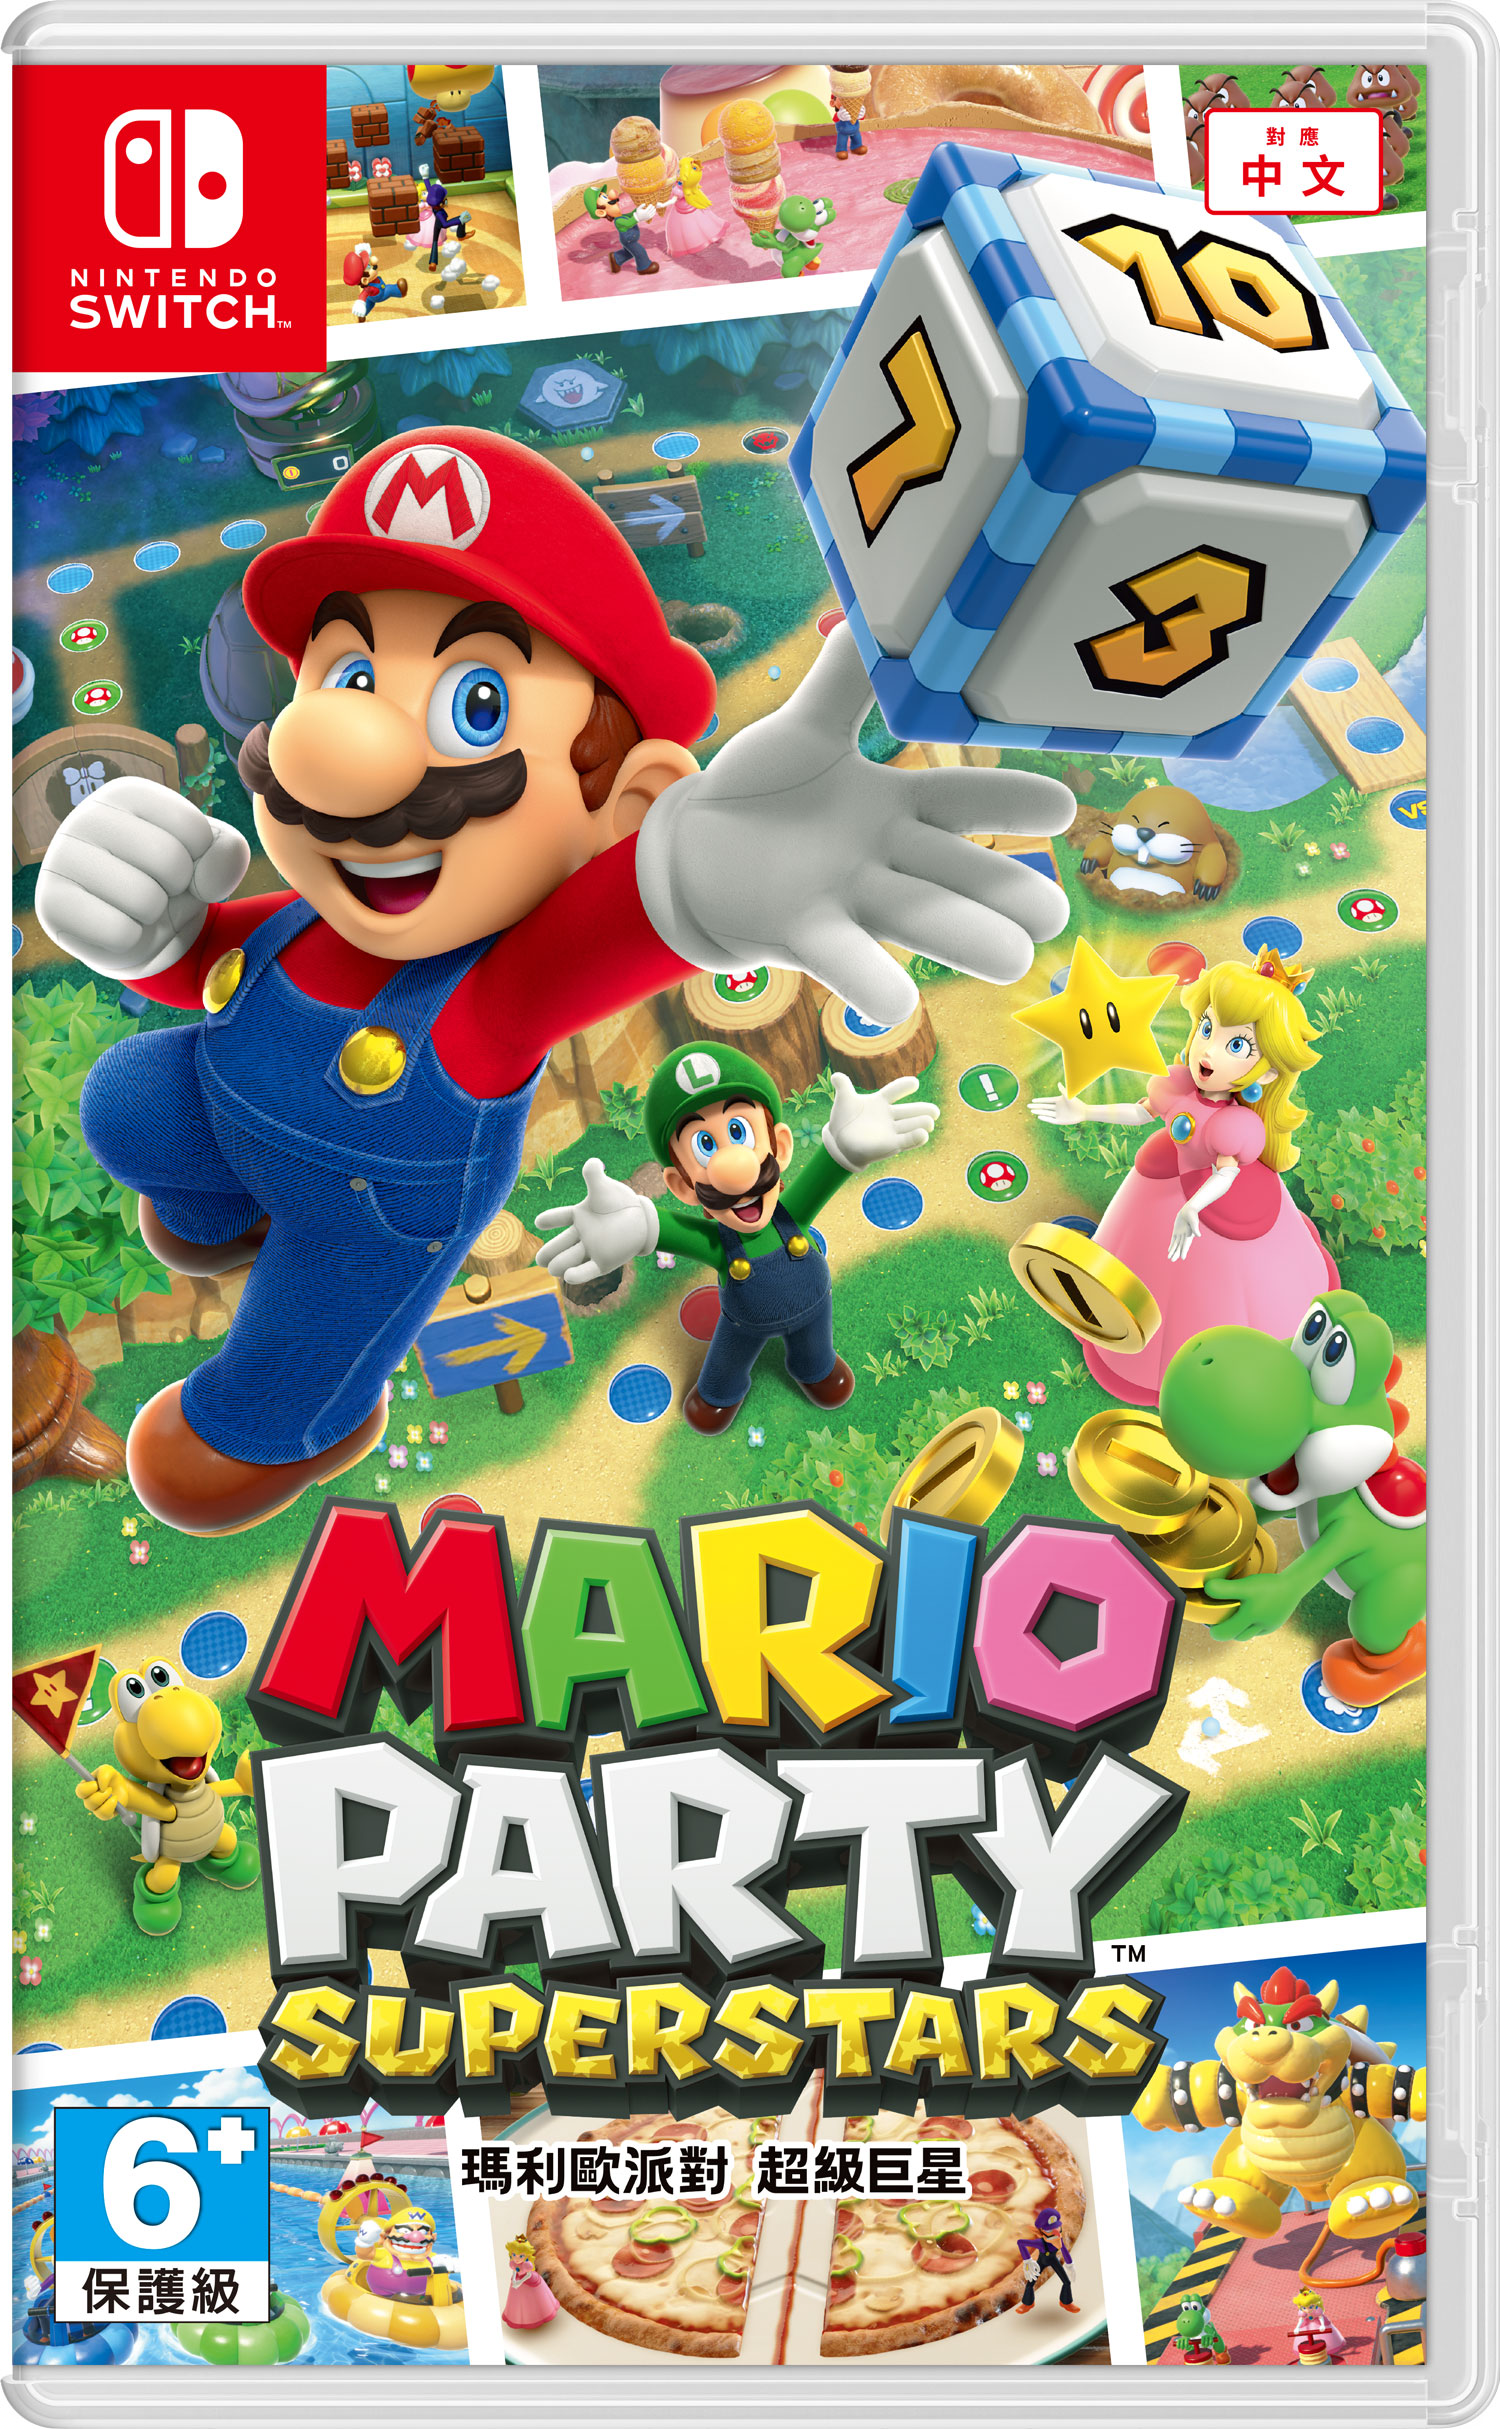 Nintendo Switch Game Software – Mario Party Superstars